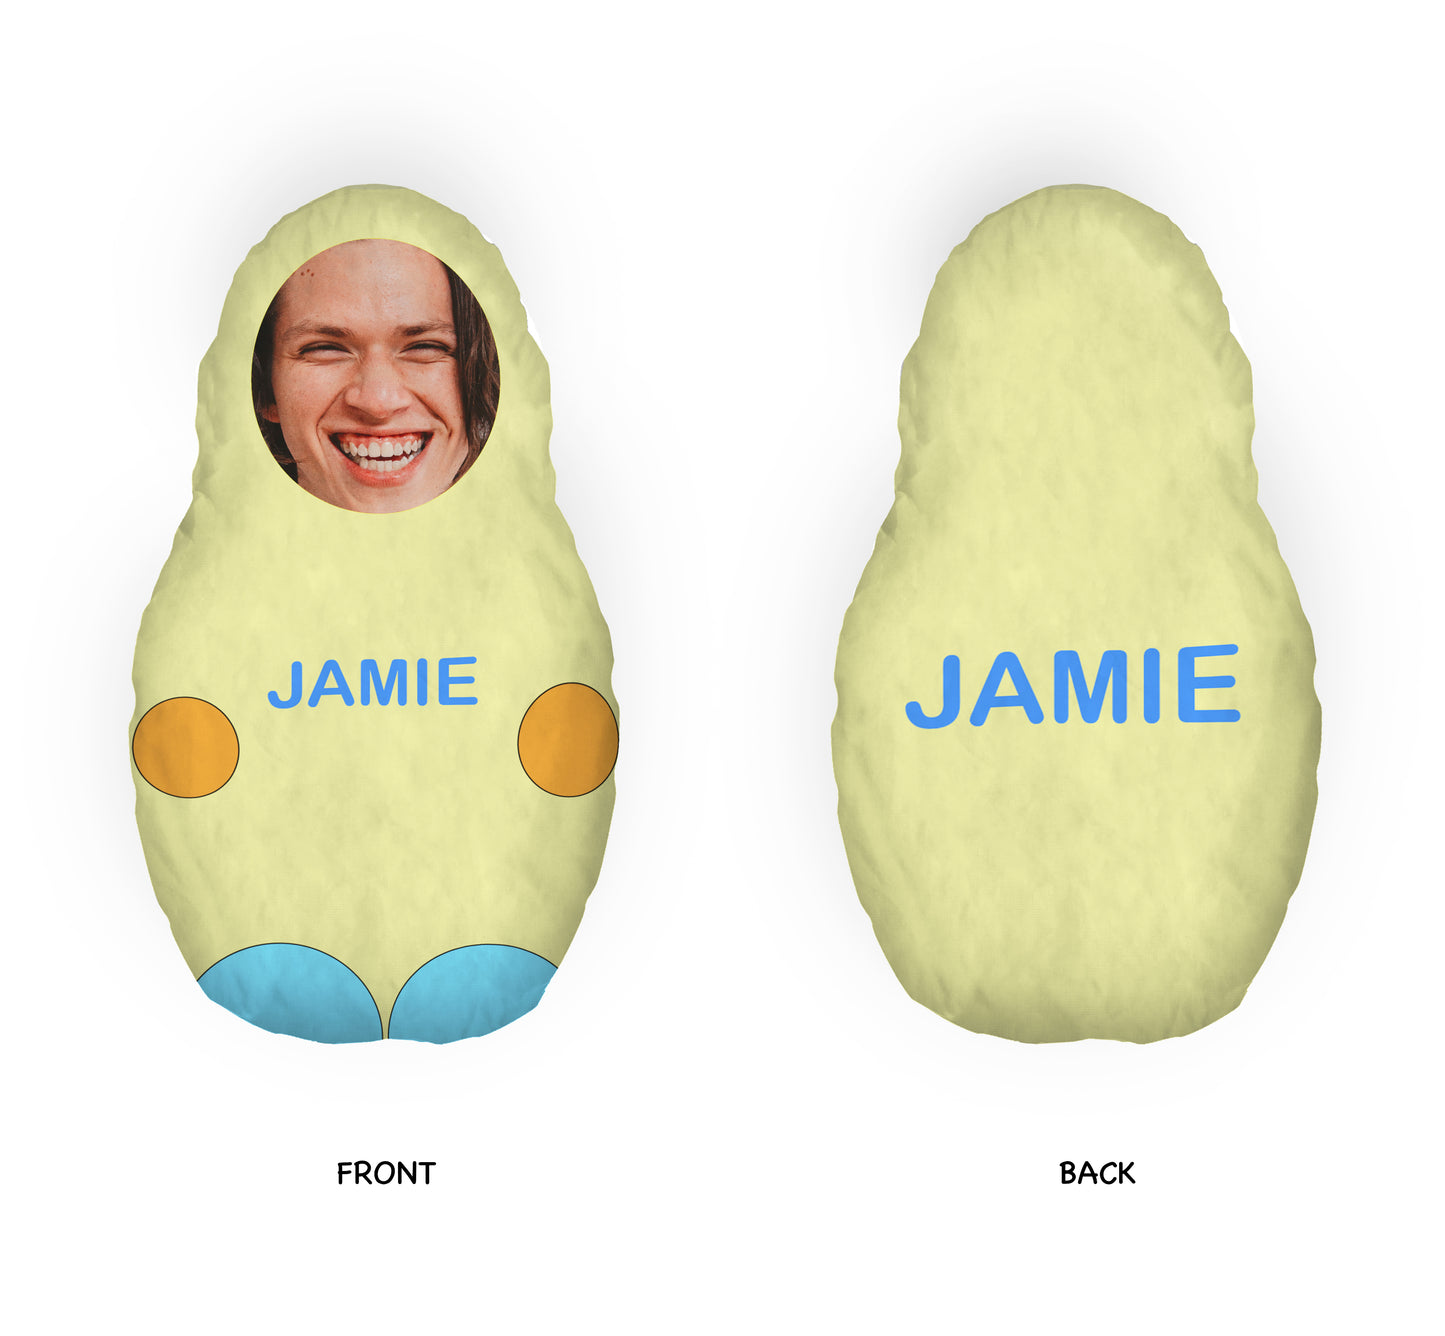 Mini Me Doll - Personalised - Yellow - 57 x 31cm. . Text Name is "Jamie", Front and Back